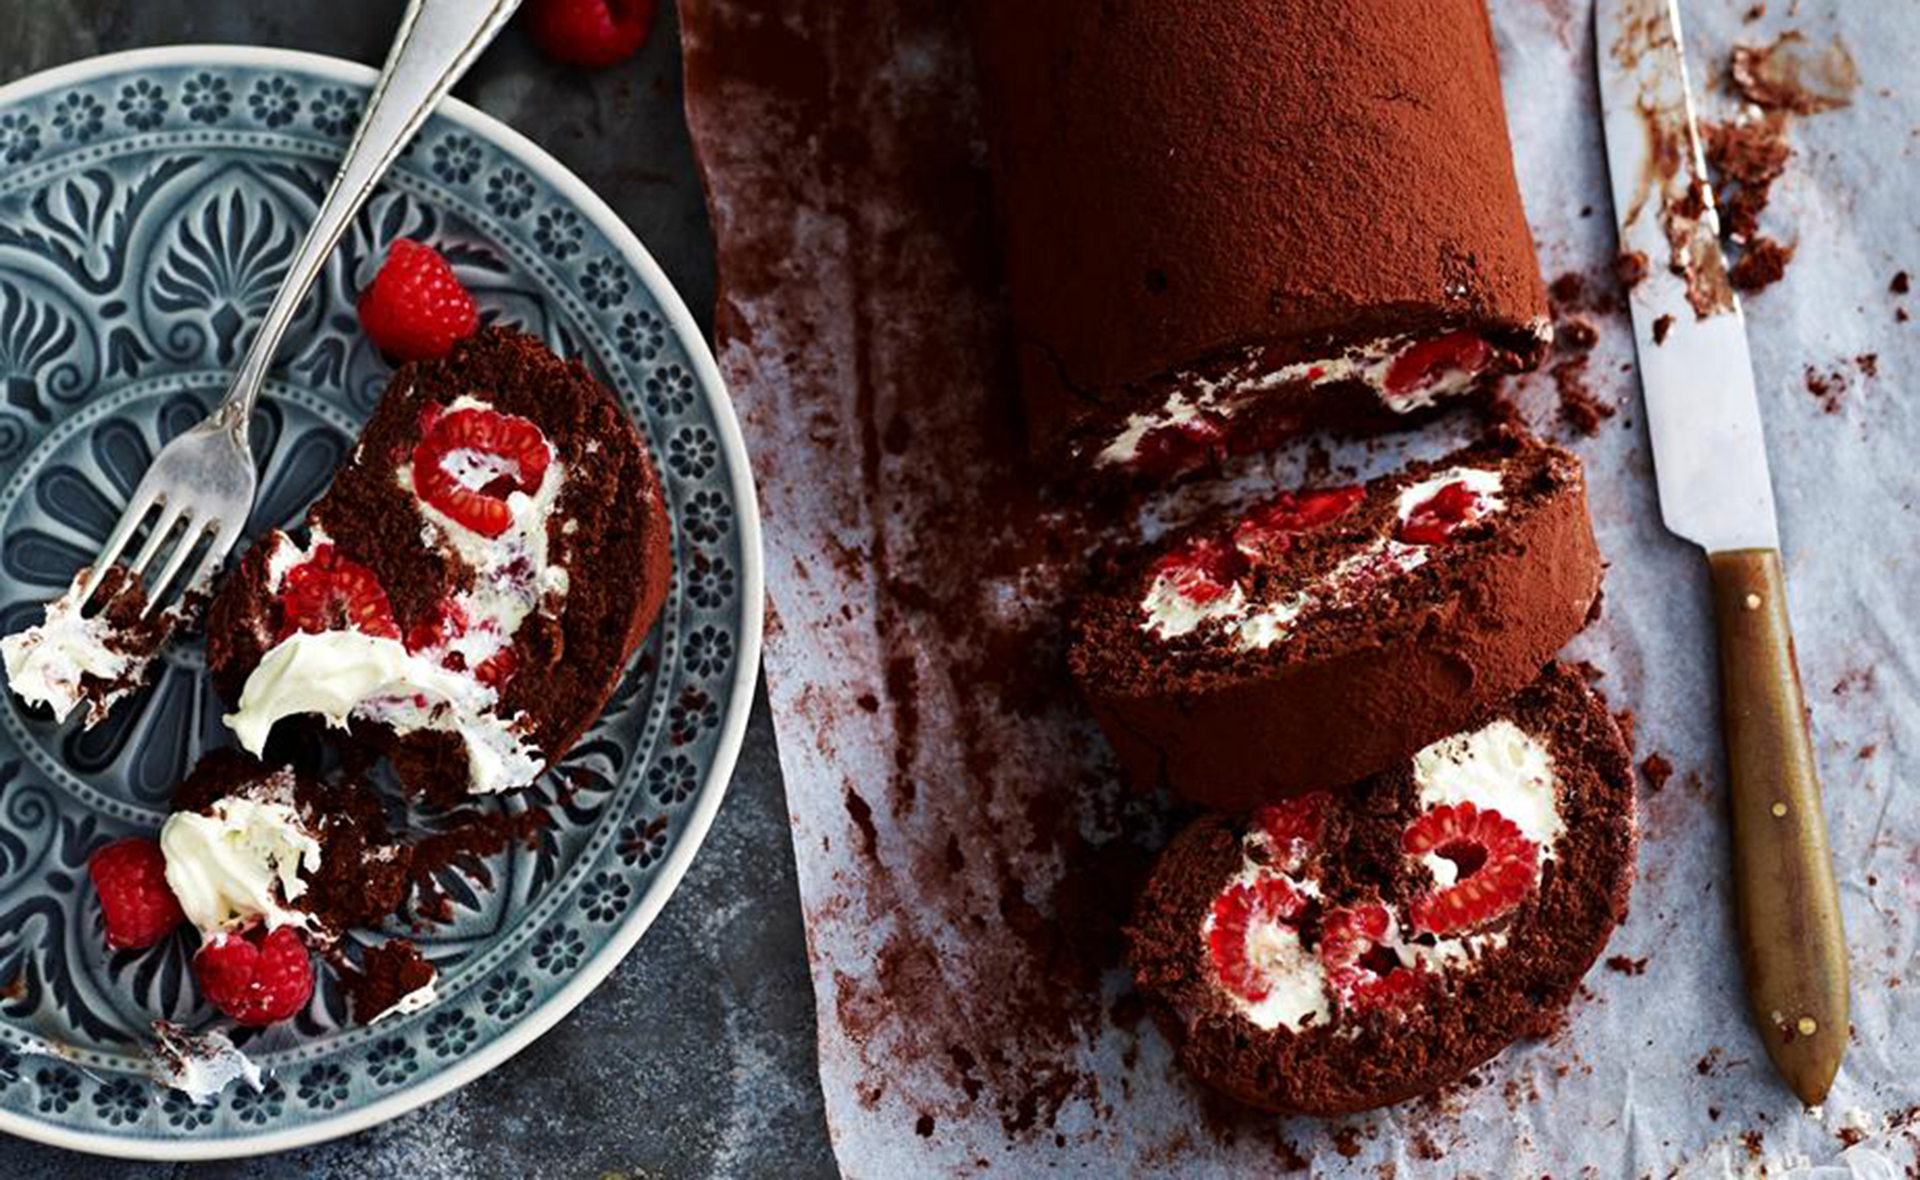 No flour? No worries! Here are 15 delicious baking recipes that don’t require any flour